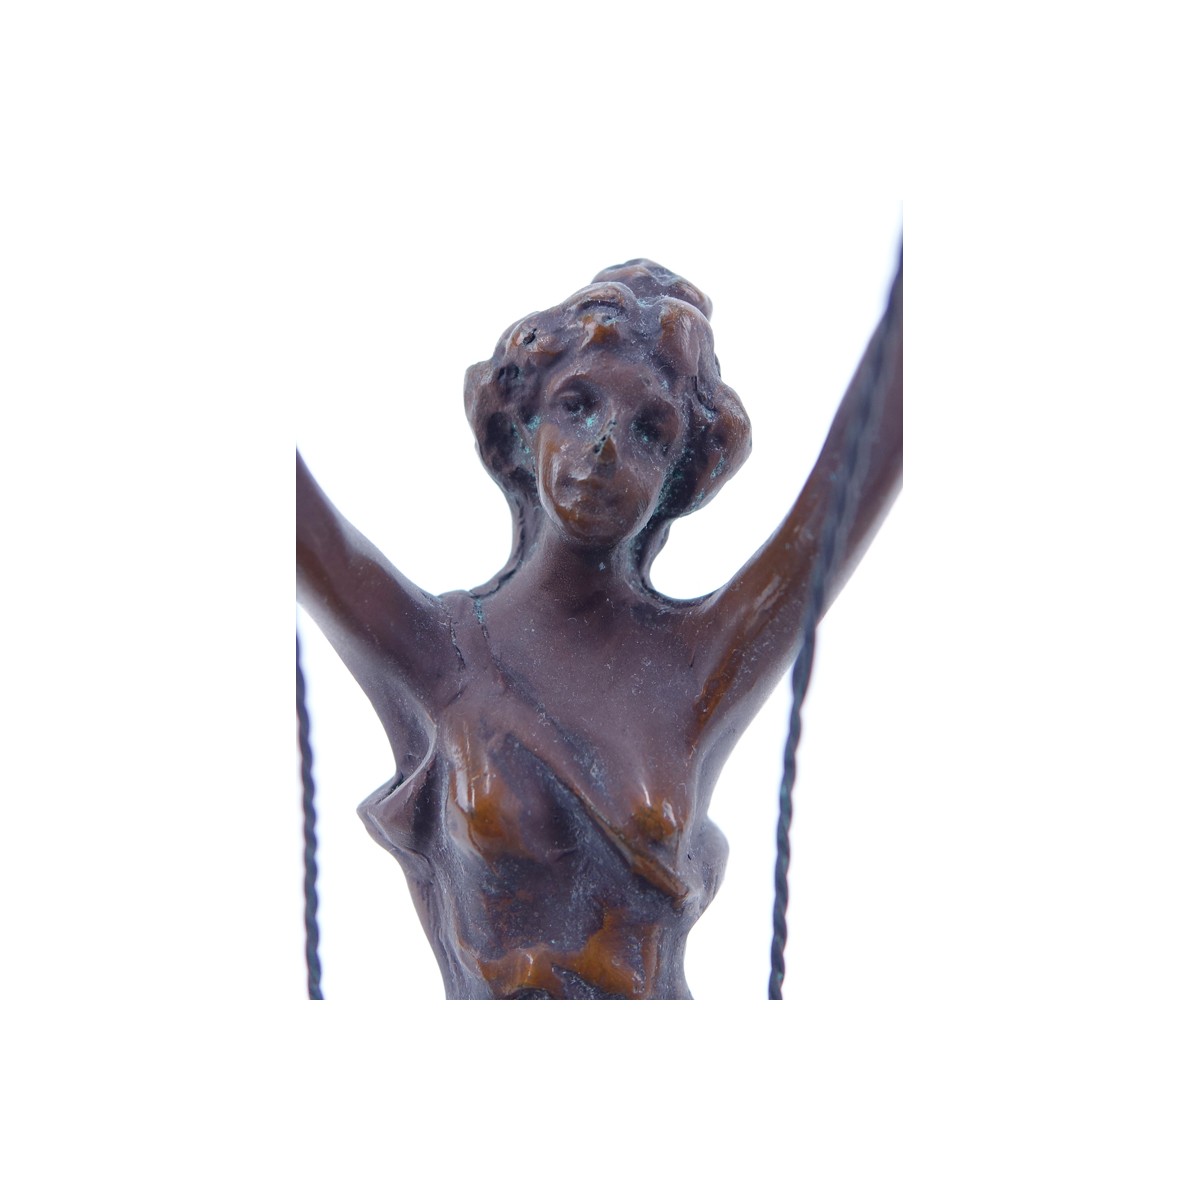 After: Auguste Louis Mathurin Moreau, French (1834-1917) Bronze "Swing Girl". Signed. Some patinati